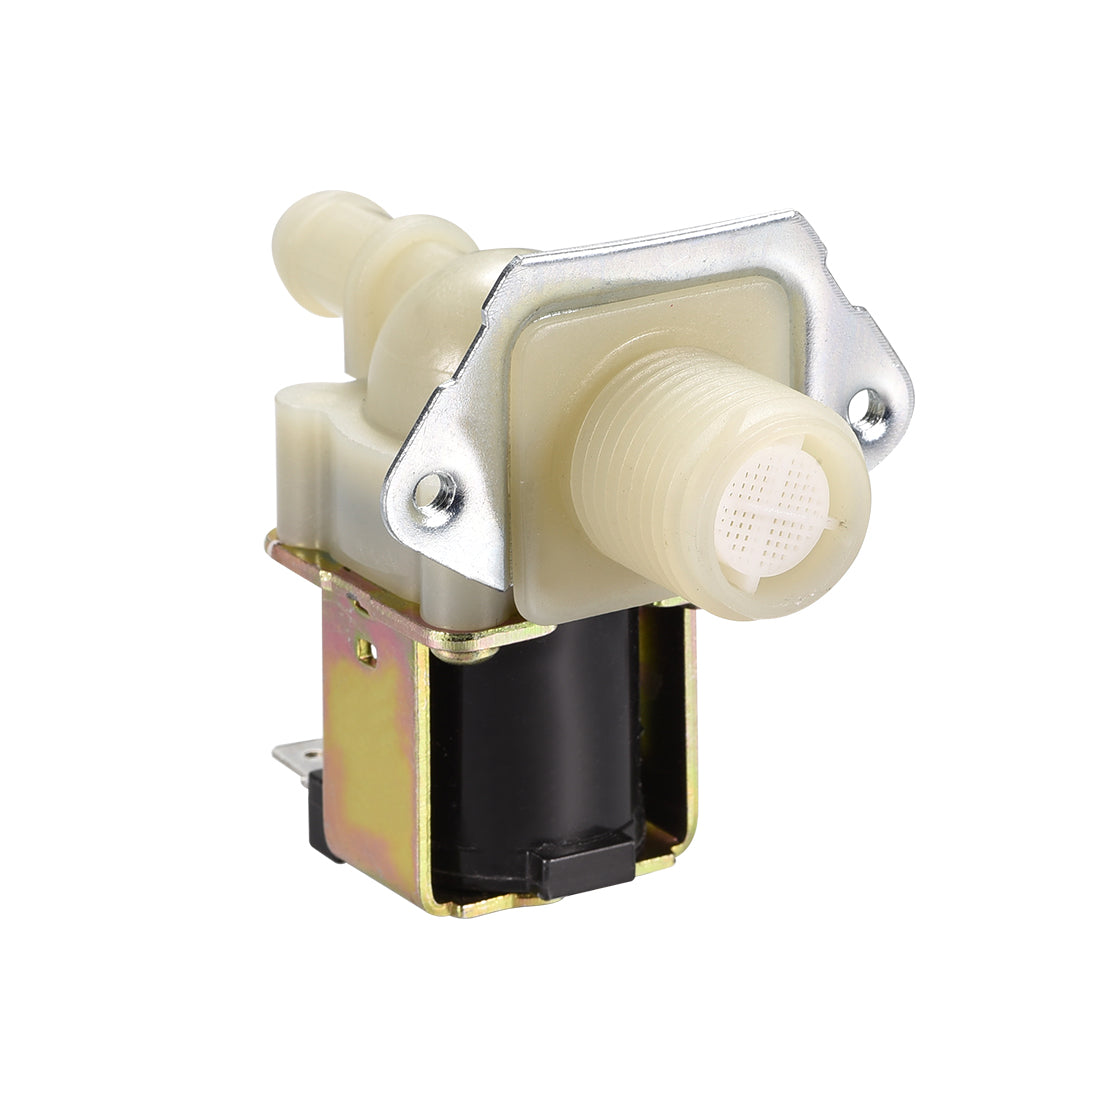 uxcell Uxcell DC12V G1/2 Plastic Water Electric Solenoid Valve Normally Closed N/C Pressure Water Inlet Valve